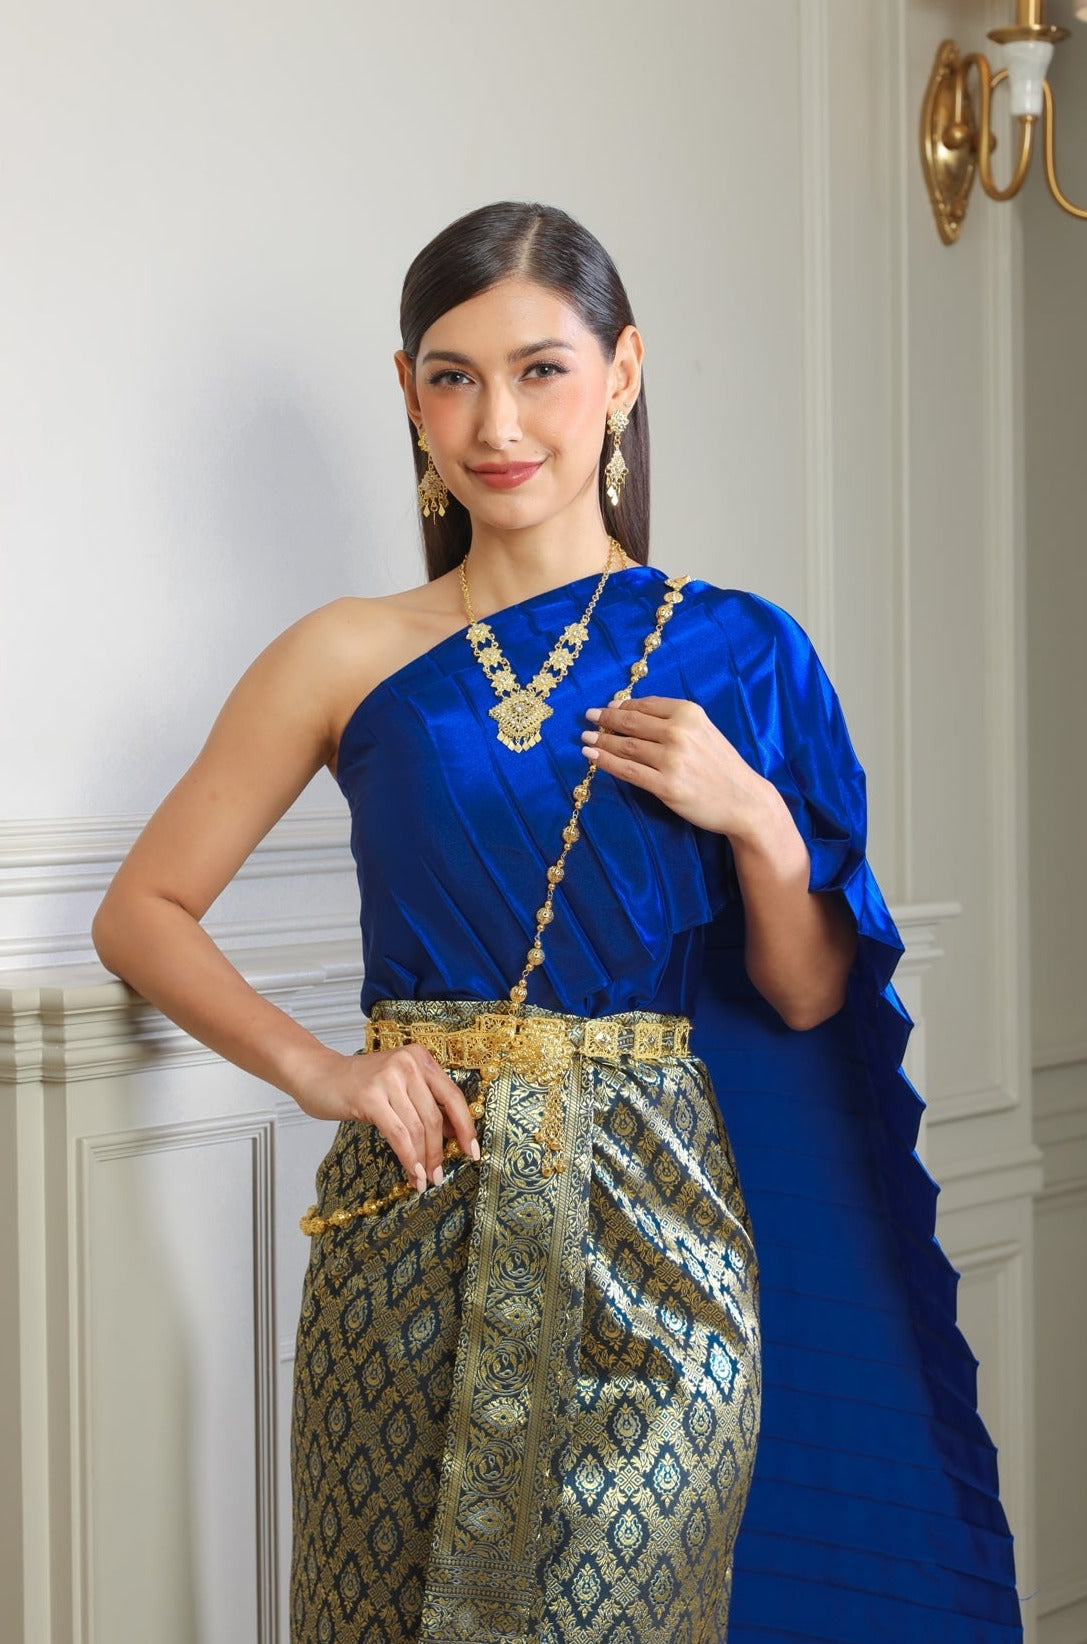 A woman posing in a traditional Thai dress.